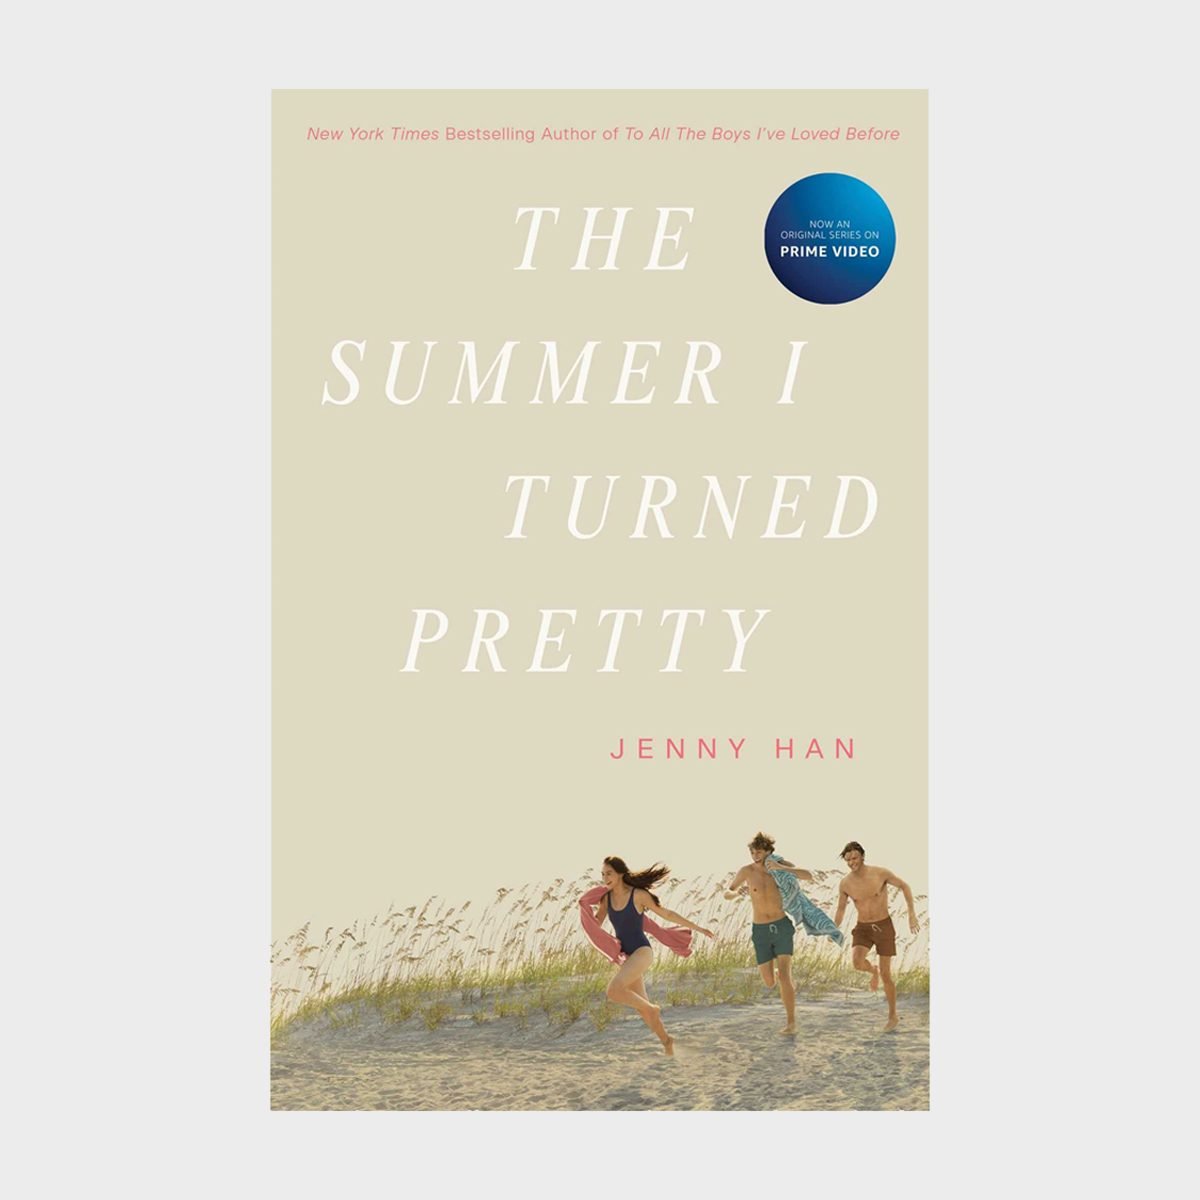 <p class=""><strong>Series starter: </strong><a href="https://www.amazon.com/Summer-I-Turned-Pretty/dp/1665922079/" rel="noopener noreferrer"><em>The Summer I Turned Pretty</em></a></p> <p class=""><strong>What you're in for: </strong>A perfect beach read that includes a swoony love triangle</p> <p>Though the <em>Summer I Turned Pretty</em> book series was only recently adapted into a TV series on Amazon, the first book was published in 2009. The sweet and summery <a href="https://www.rd.com/list/book-series-for-teens/" rel="noopener noreferrer">YA book series</a> follows 15-year-old Belly Conklin, a teen who spends her summers at Cousins beach with her brother, her mother and her mother's best friend, Susannah. Then there are Susannah's two boys, Jeremiah and Conrad. The pair couldn't be more different, yet each own a part of Belly's heart. You might pick up this <a href="https://www.rd.com/list/best-books-for-teens" rel="noopener noreferrer">teen book</a> for the swoony summer romances, but you'll appreciate its depth in the parental subplot. Just come ready with tissues—you may <a href="https://www.rd.com/list/books-that-will-make-you-cry/" rel="noopener noreferrer">experience a few tears</a> during the series!</p> <p class="listicle-page__cta-button-shop"><a class="shop-btn" href="https://www.amazon.com/Summer-I-Turned-Pretty/dp/1665922079/">Shop Now</a></p>